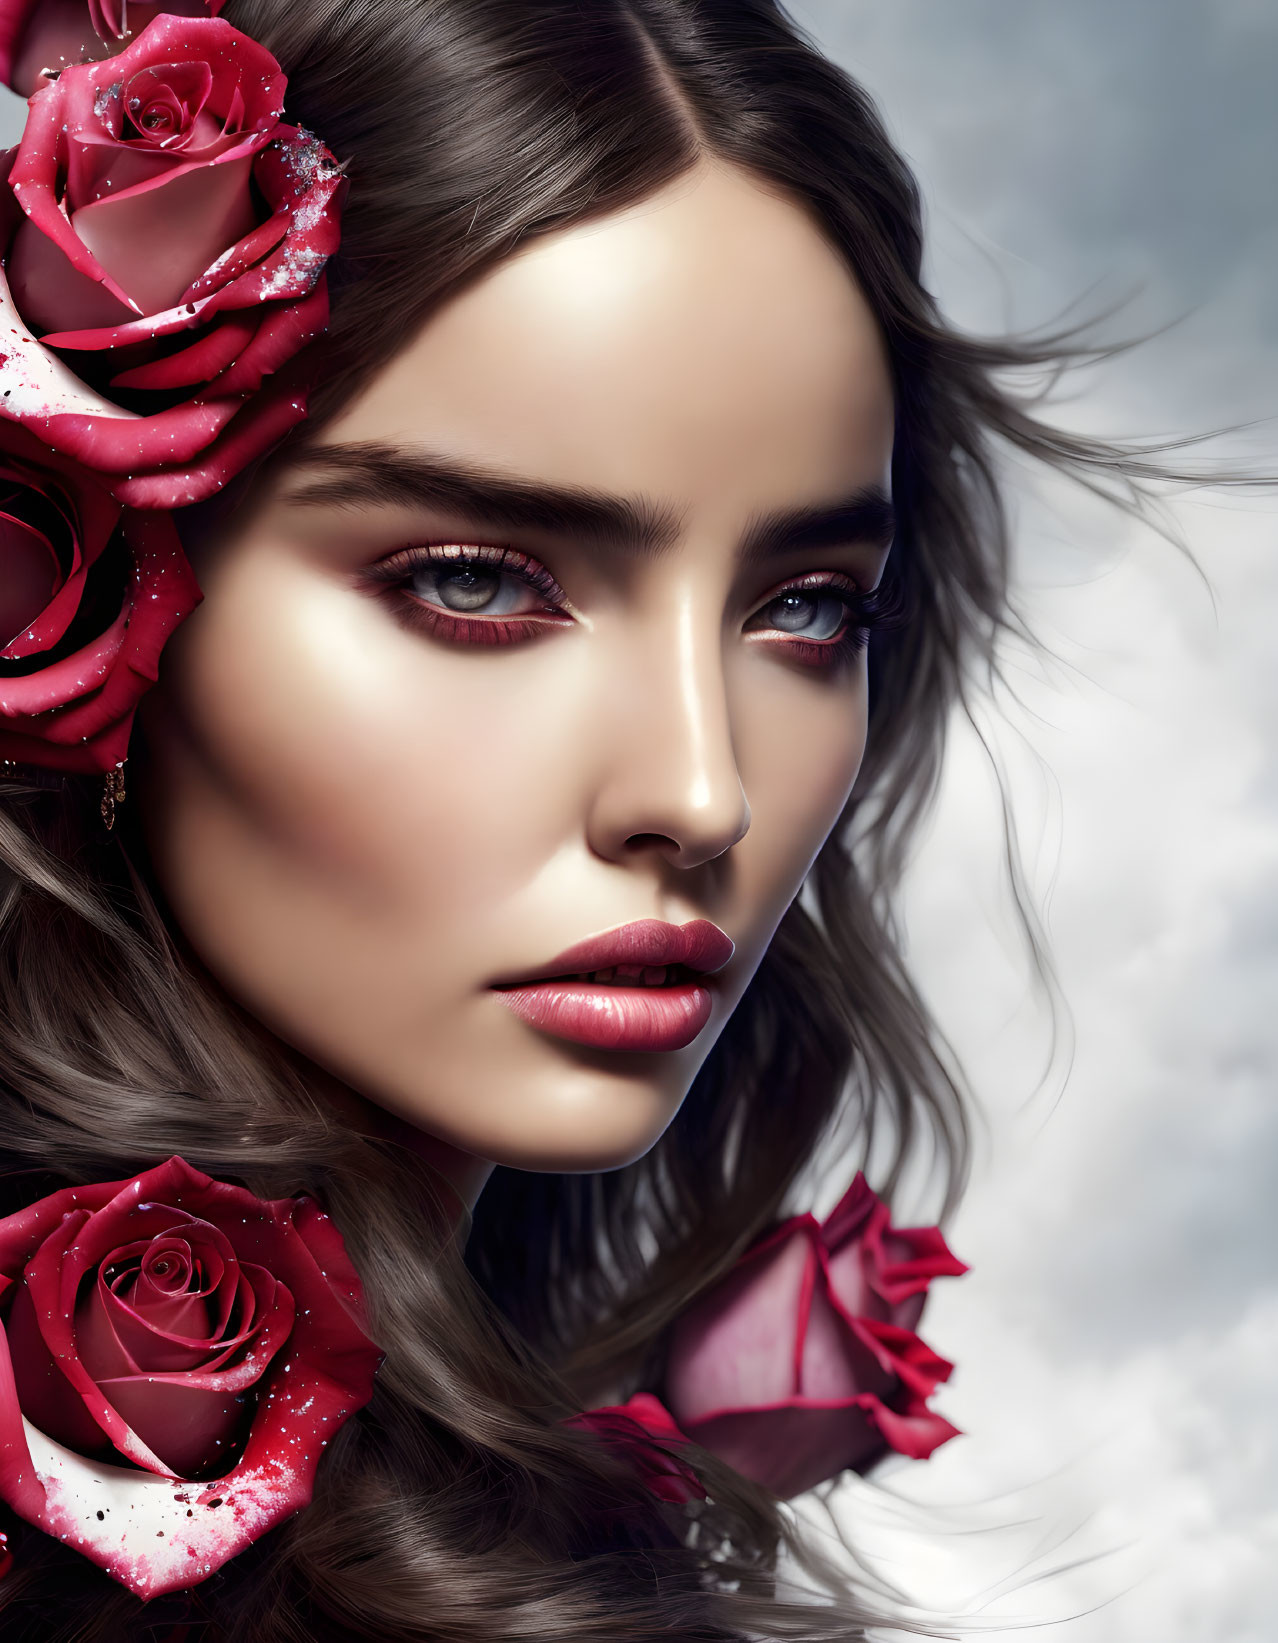 Digital portrait of woman with dramatic makeup and red roses in hair against cloudy sky.